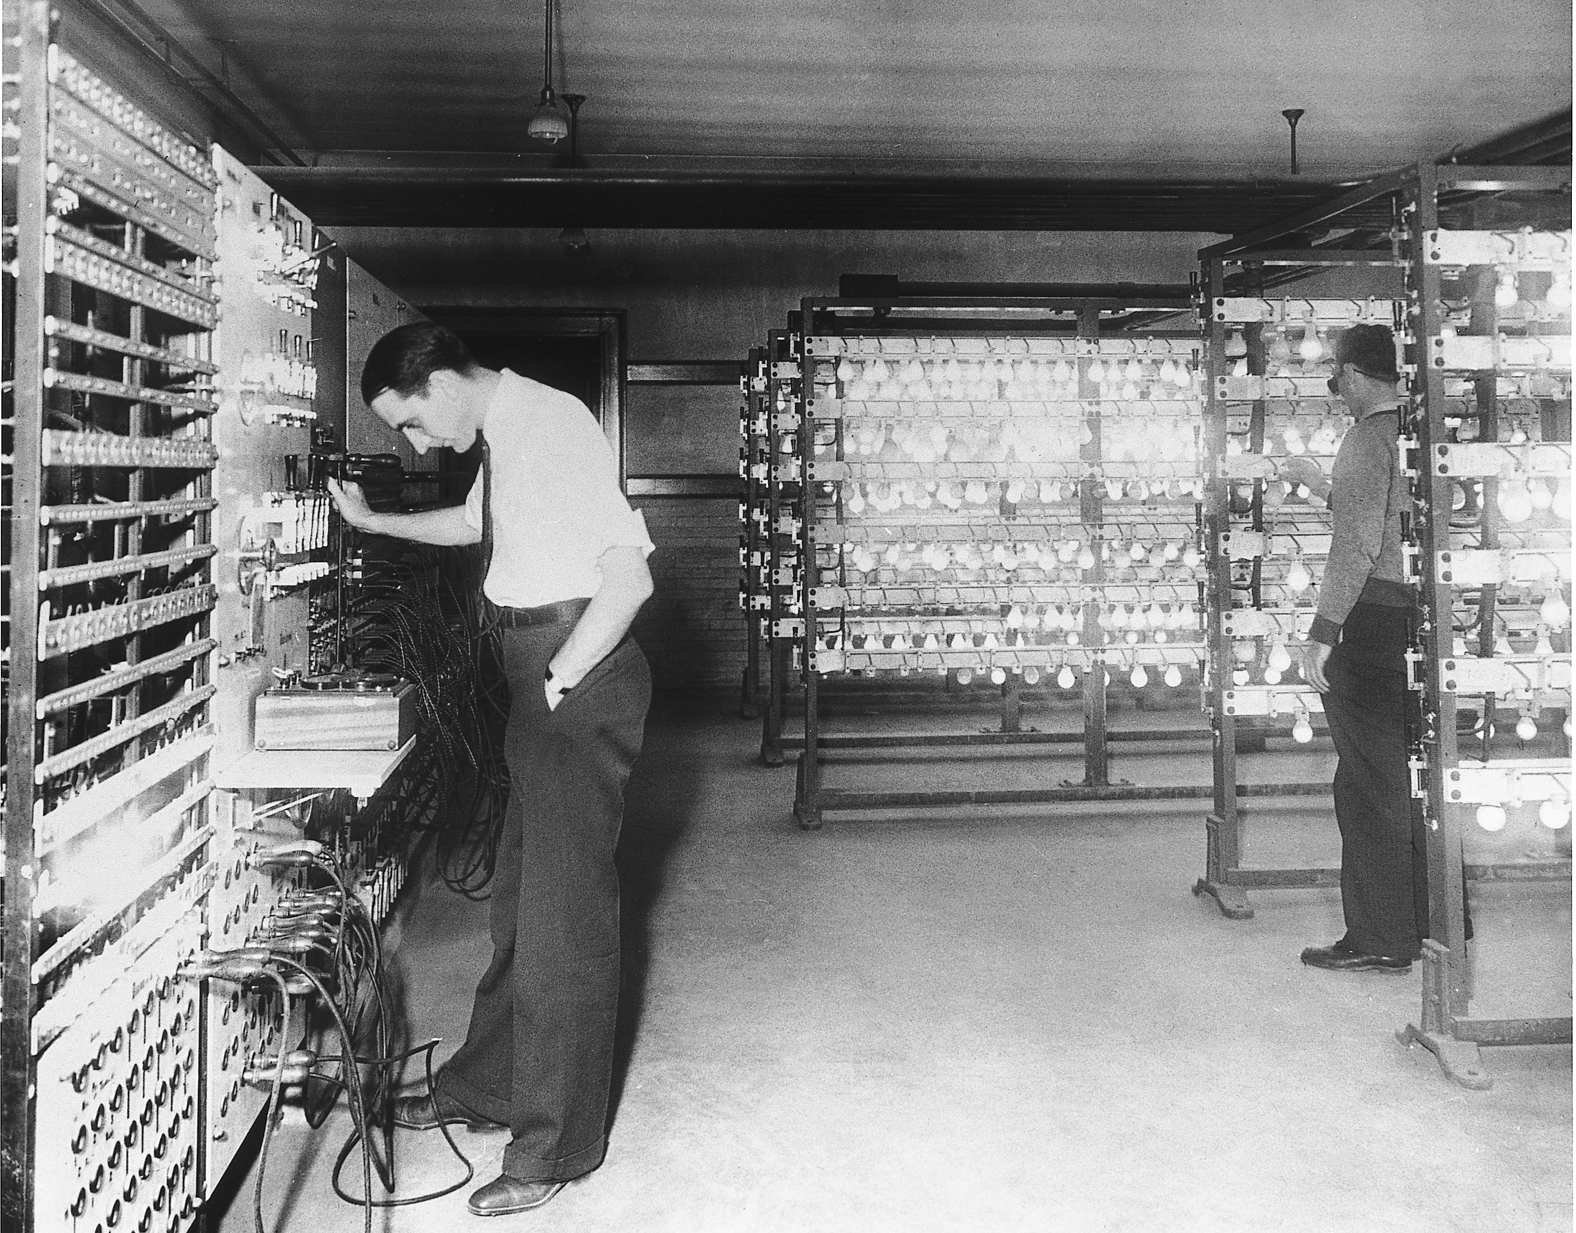 two researchers examining instruments in a laboratory filled with illuminated lightbulbs